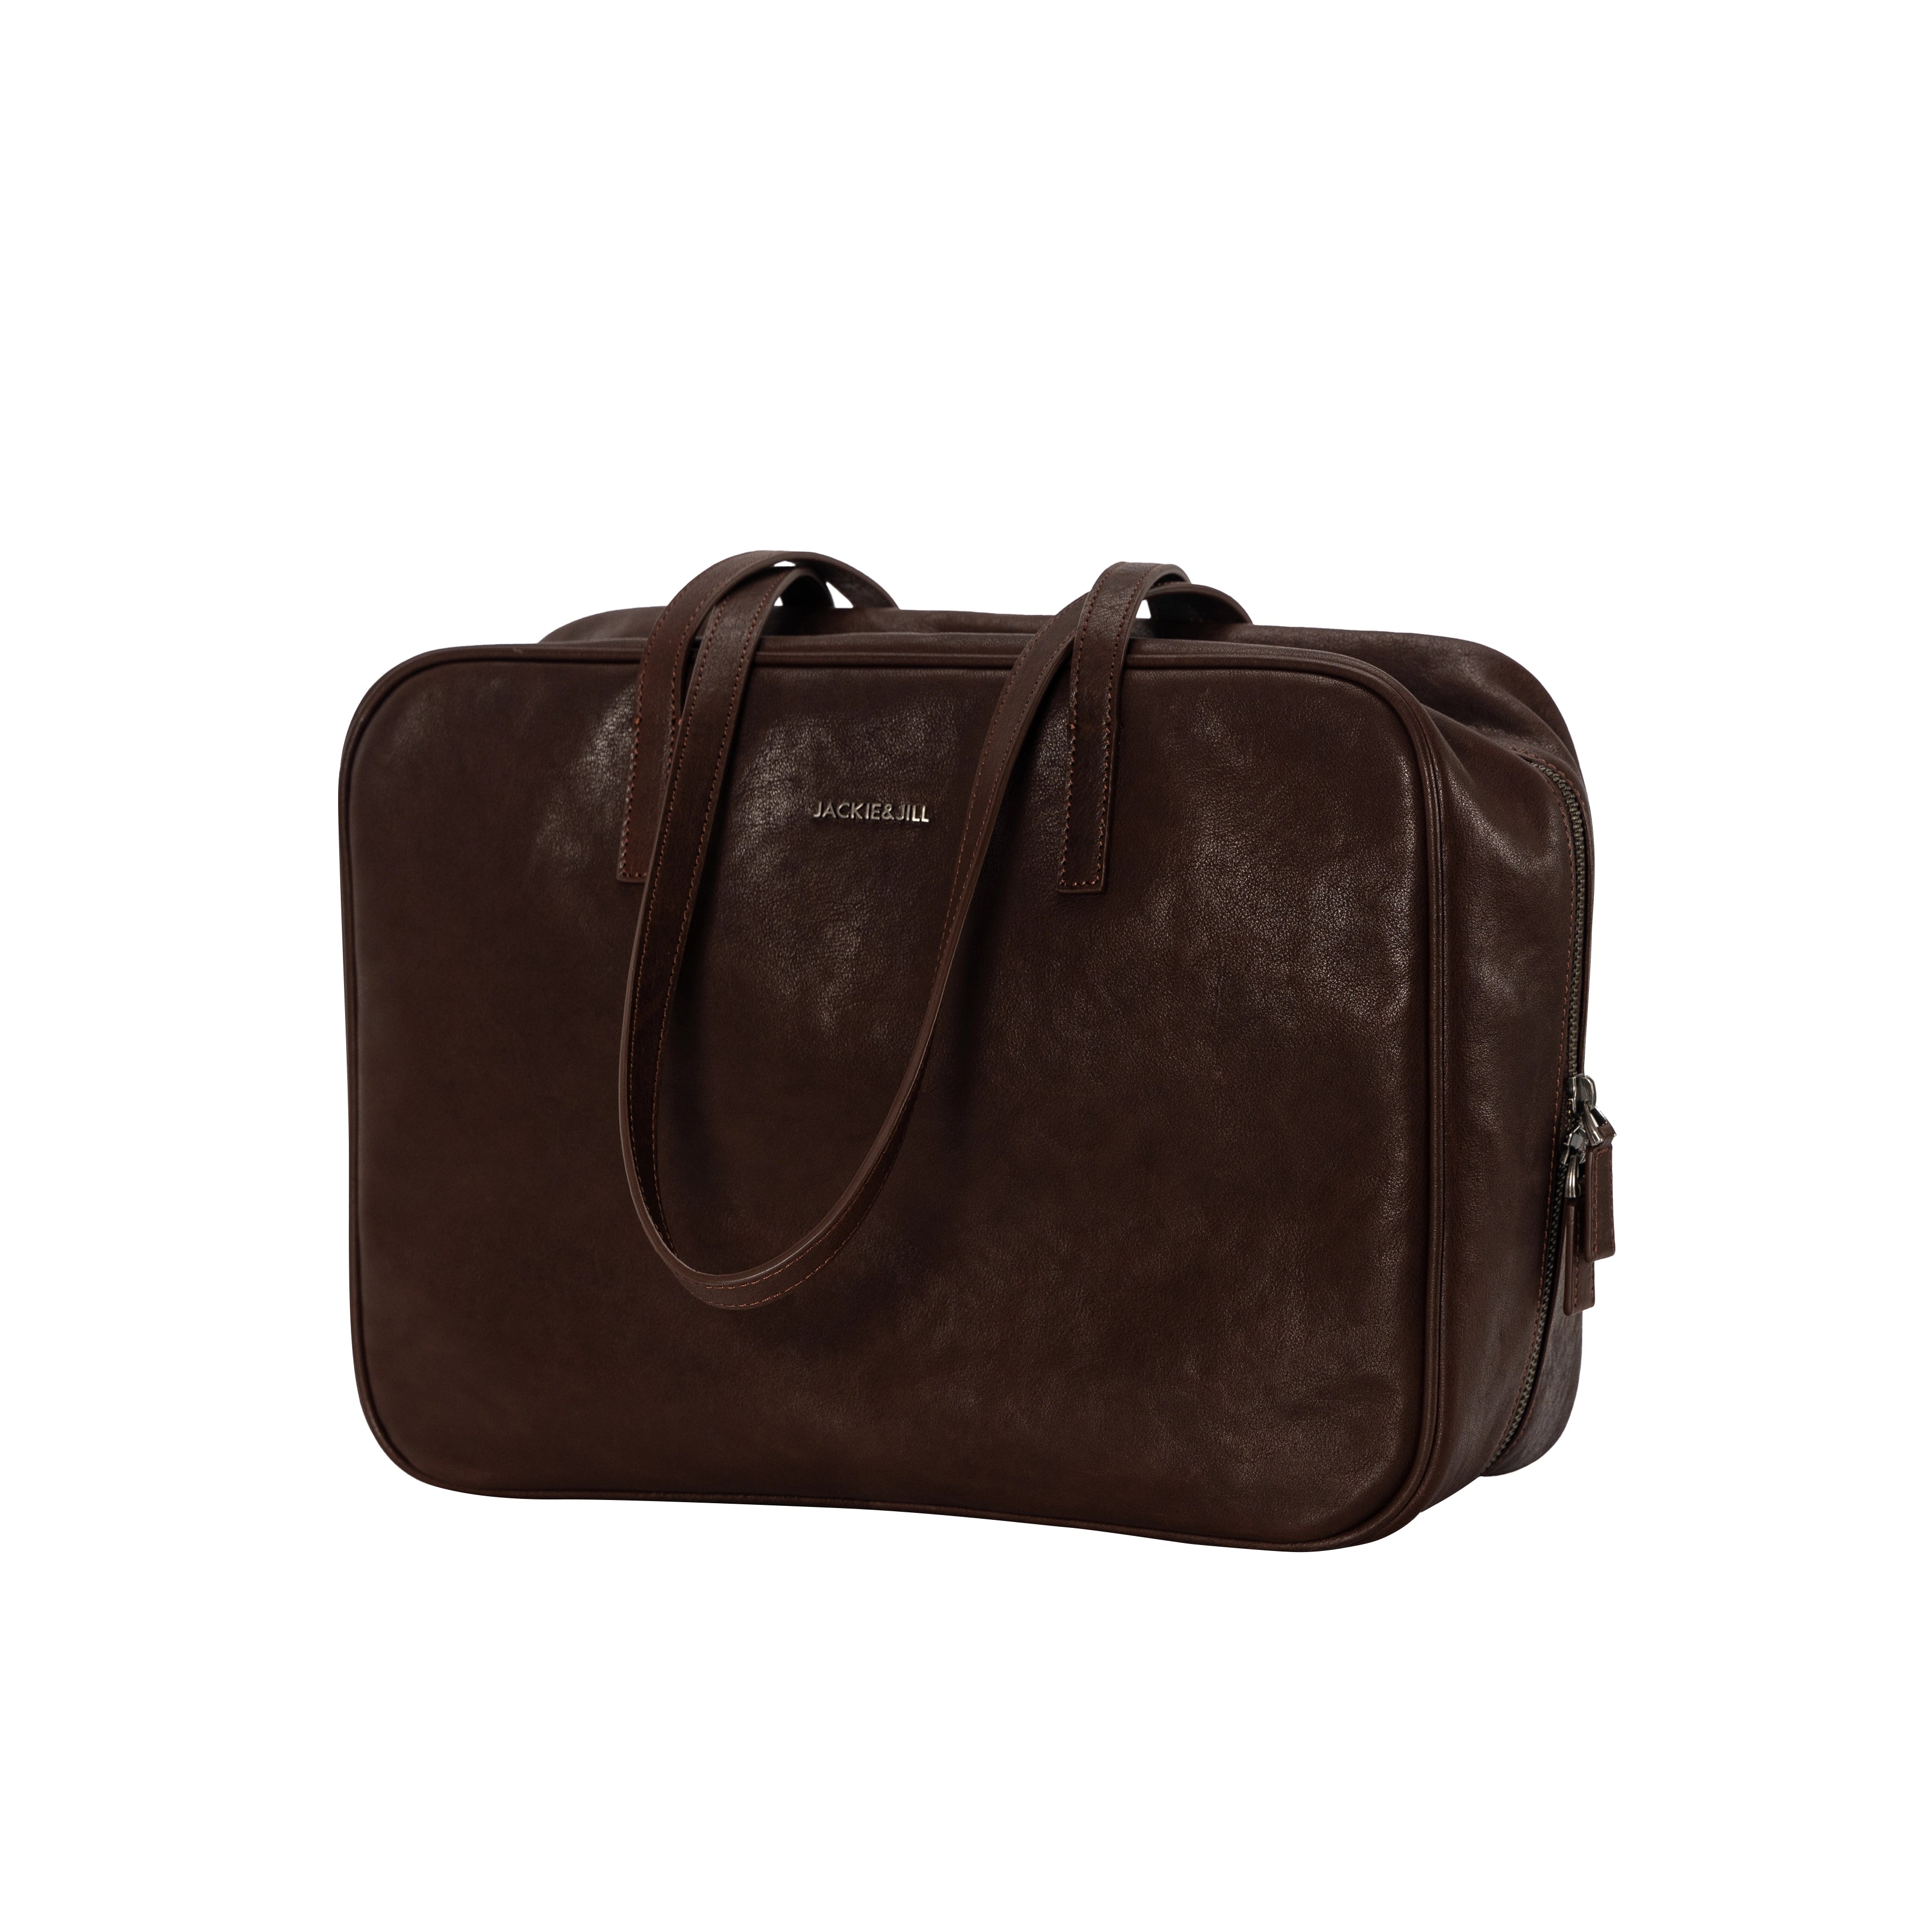 Genuine leather universal commuter business casual bag